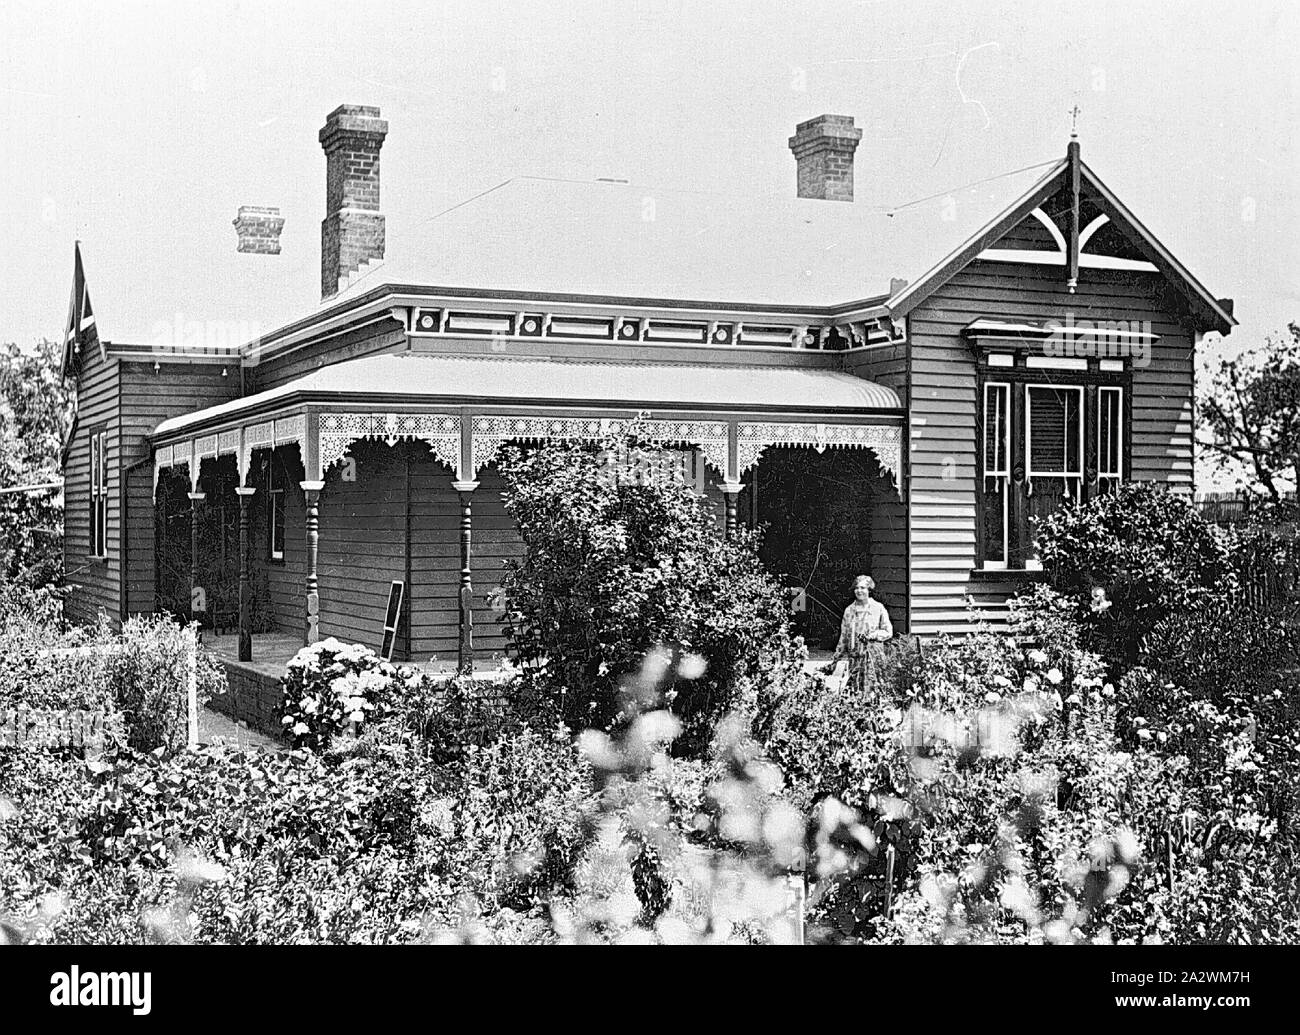 Negative - Woman by Verandah, Bullarook District, Victoria, 1927, A woman stands by the verandah of a house. The house appears well kept and newly painted (?). The garden in front of the house is in full bloom. There are three visible chimneys on the house and wrought iron lace work on the verandah Stock Photo